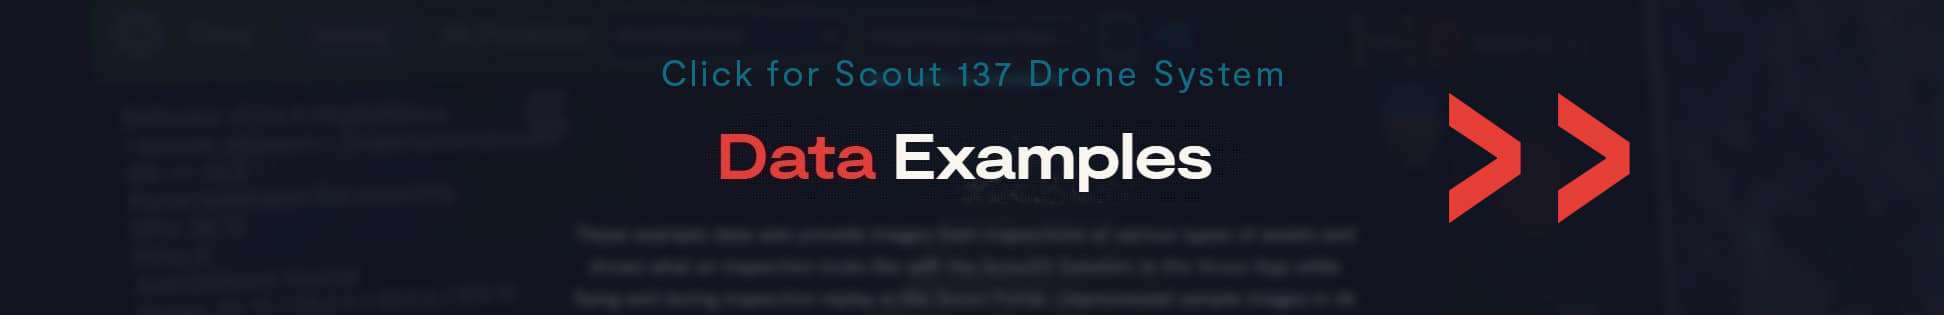 Link - click to see more drone inspection datasets from ScoutDI